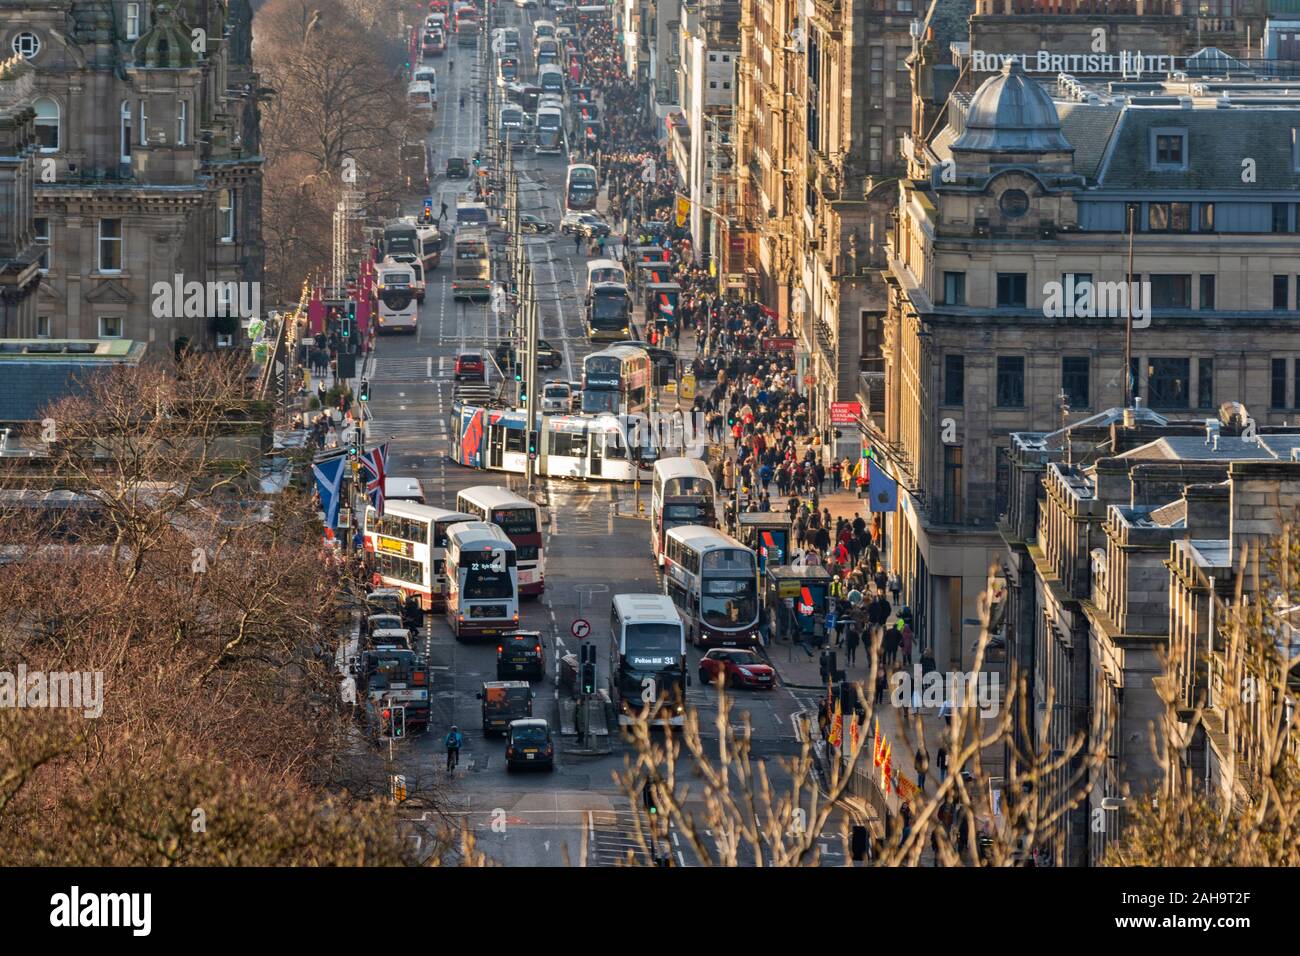 EDINBURGH SCOTLAND WINTER TIME CITY VIEW OF PRINCES STREET WITH CROWDS ON THE PAVEMENT AND TRAFFIC CONGESTION ON THE ROAD Stock Photo